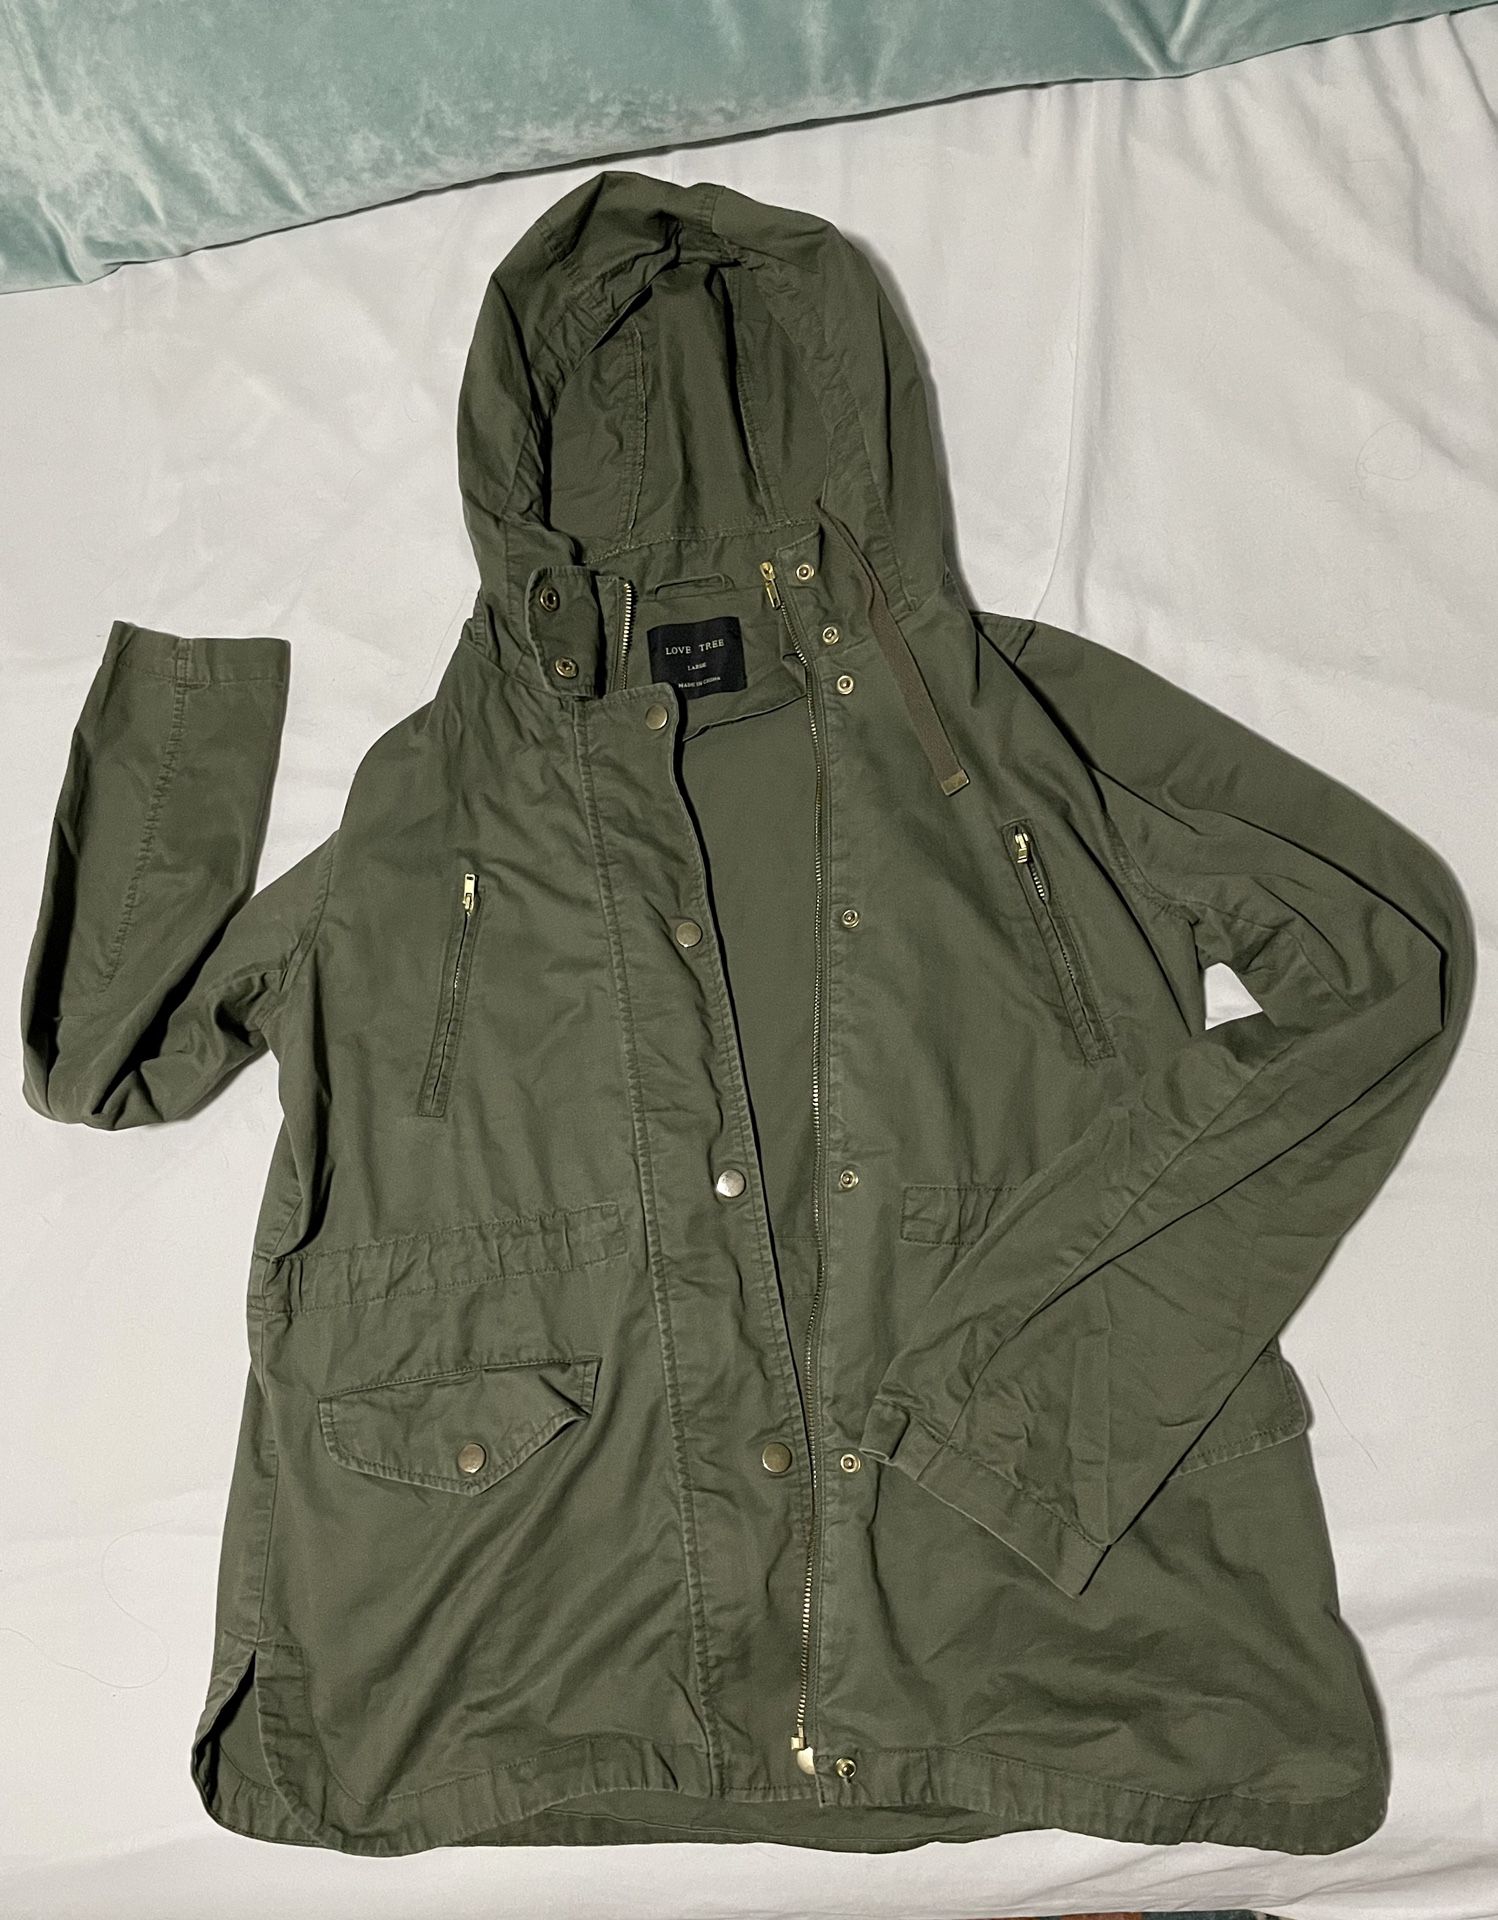 Olive green army jacket